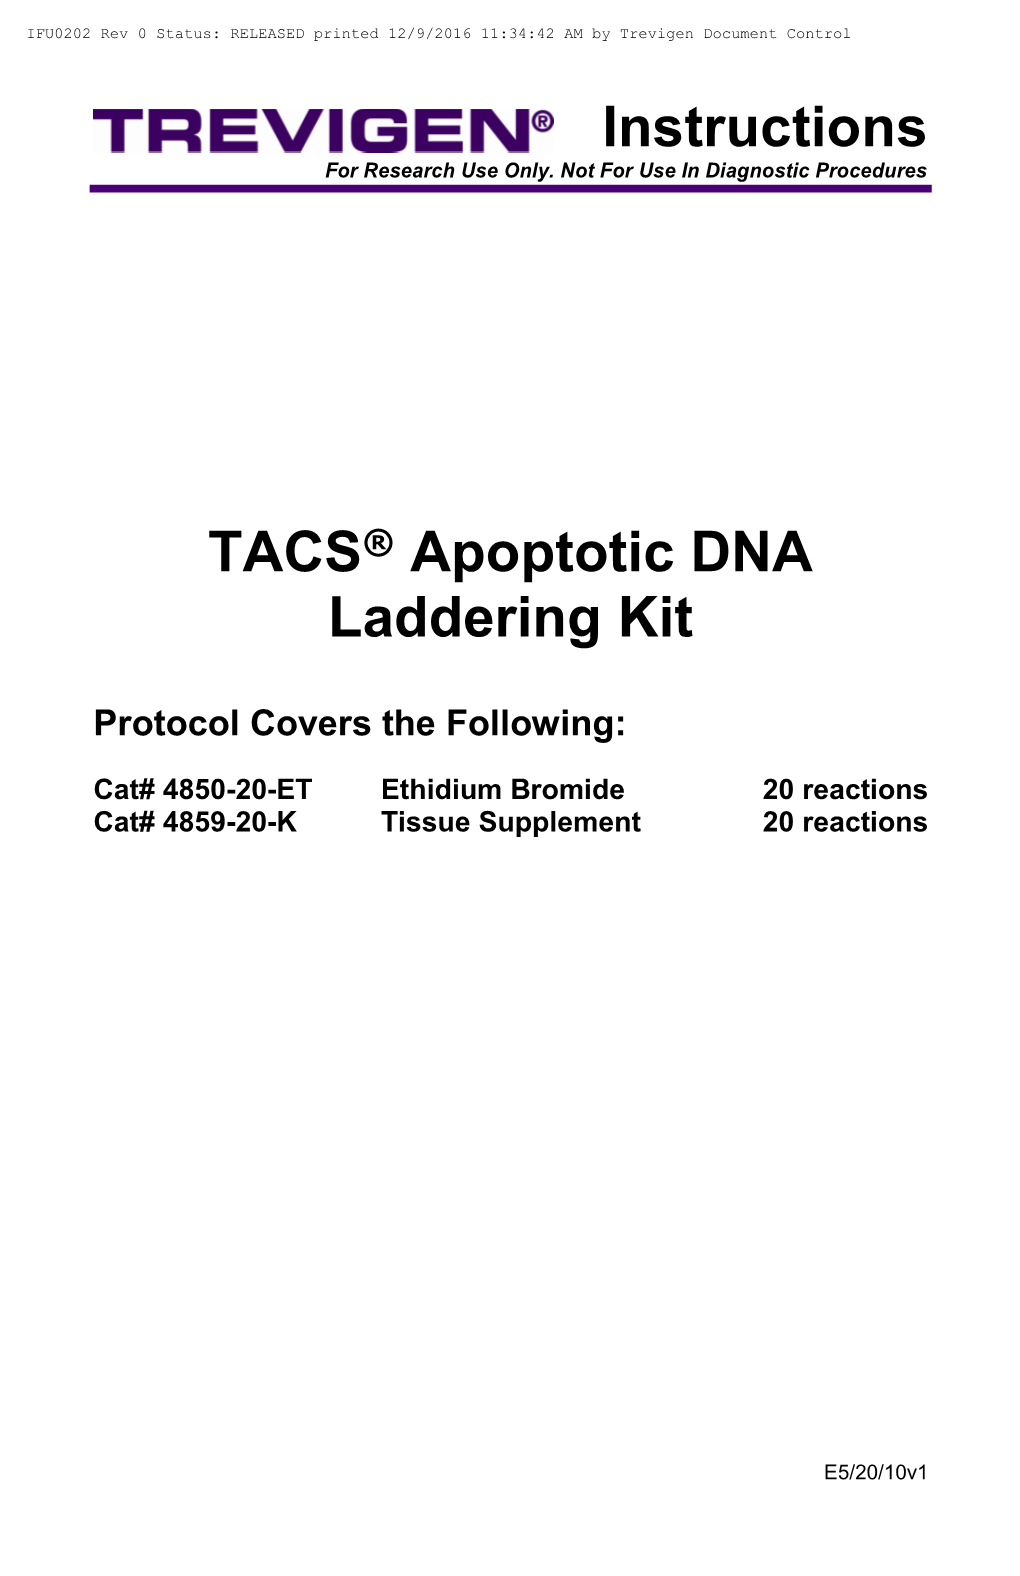 Instructions TACS Apoptotic DNA Laddering